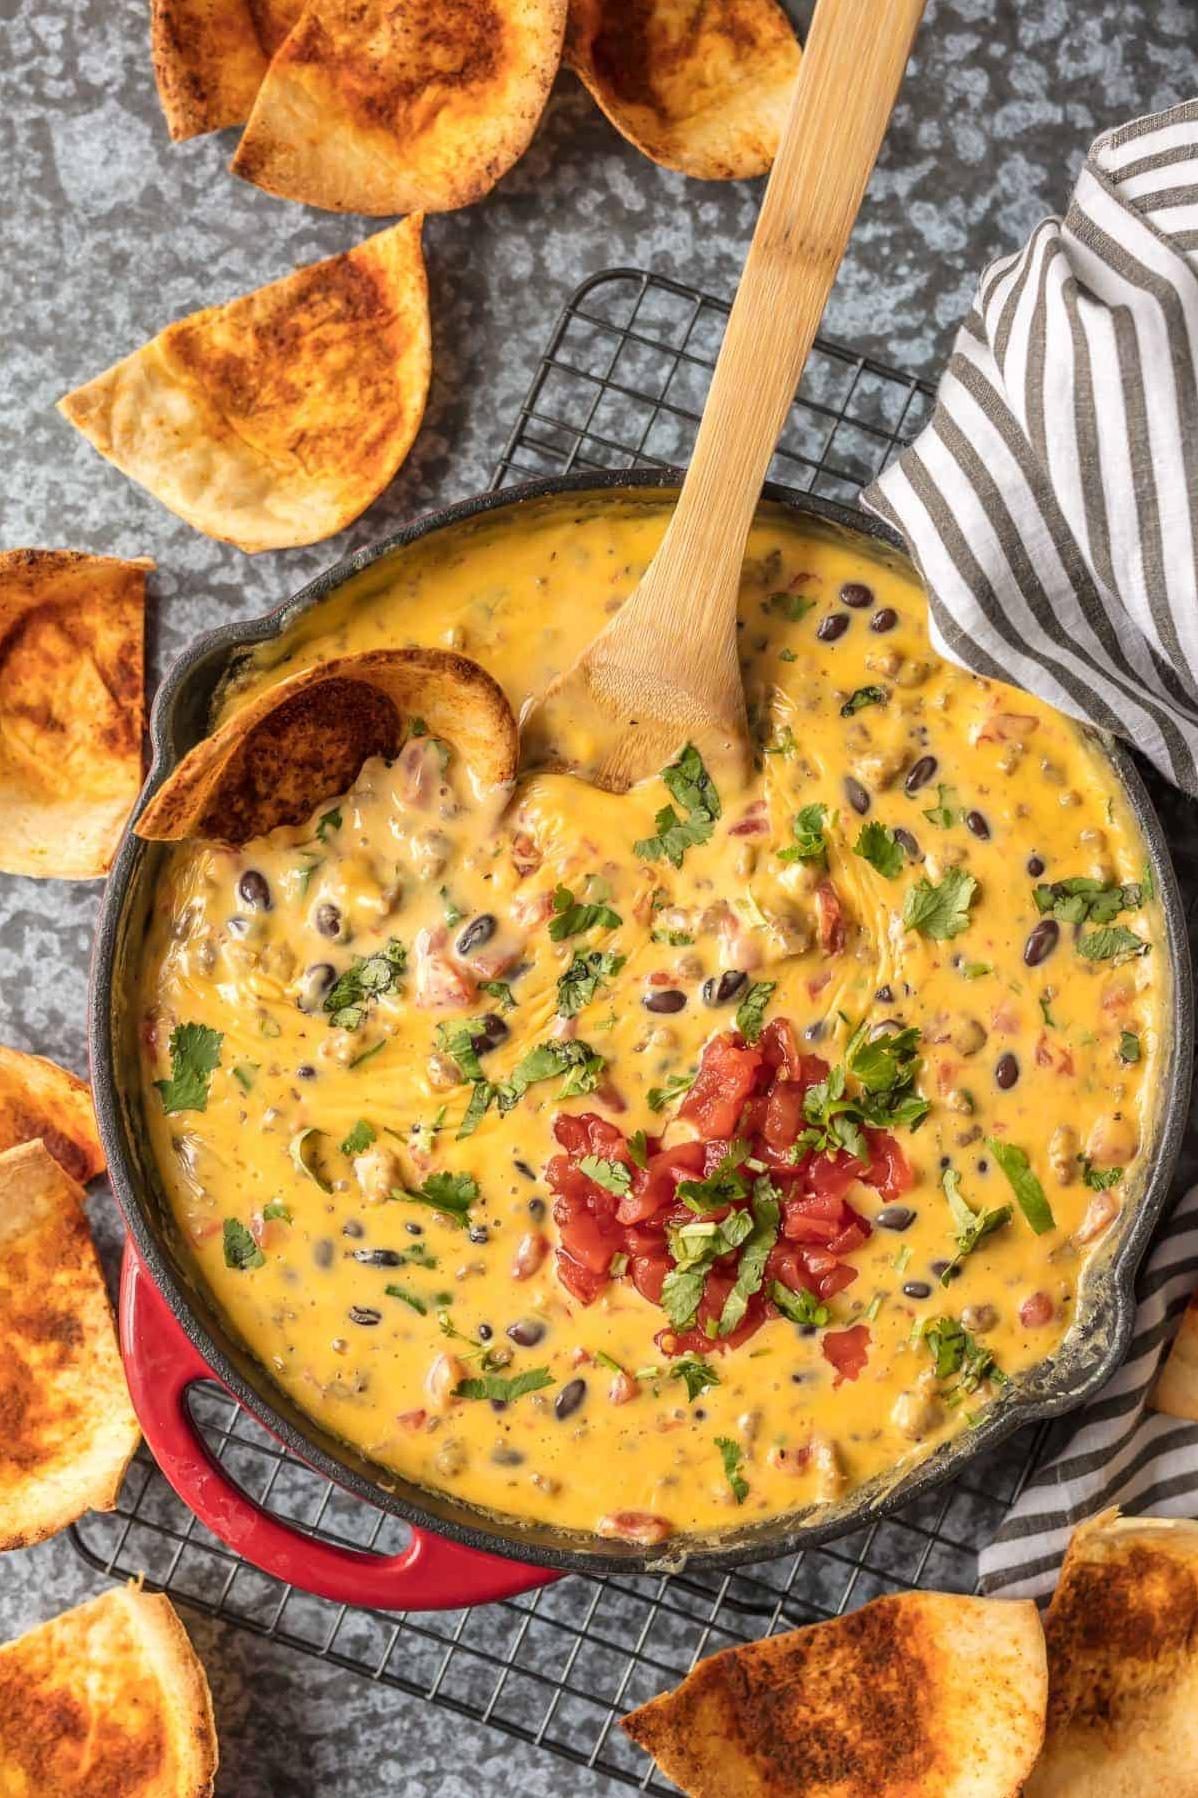  Add some spice to your life with this zesty and creamy cheese dip.